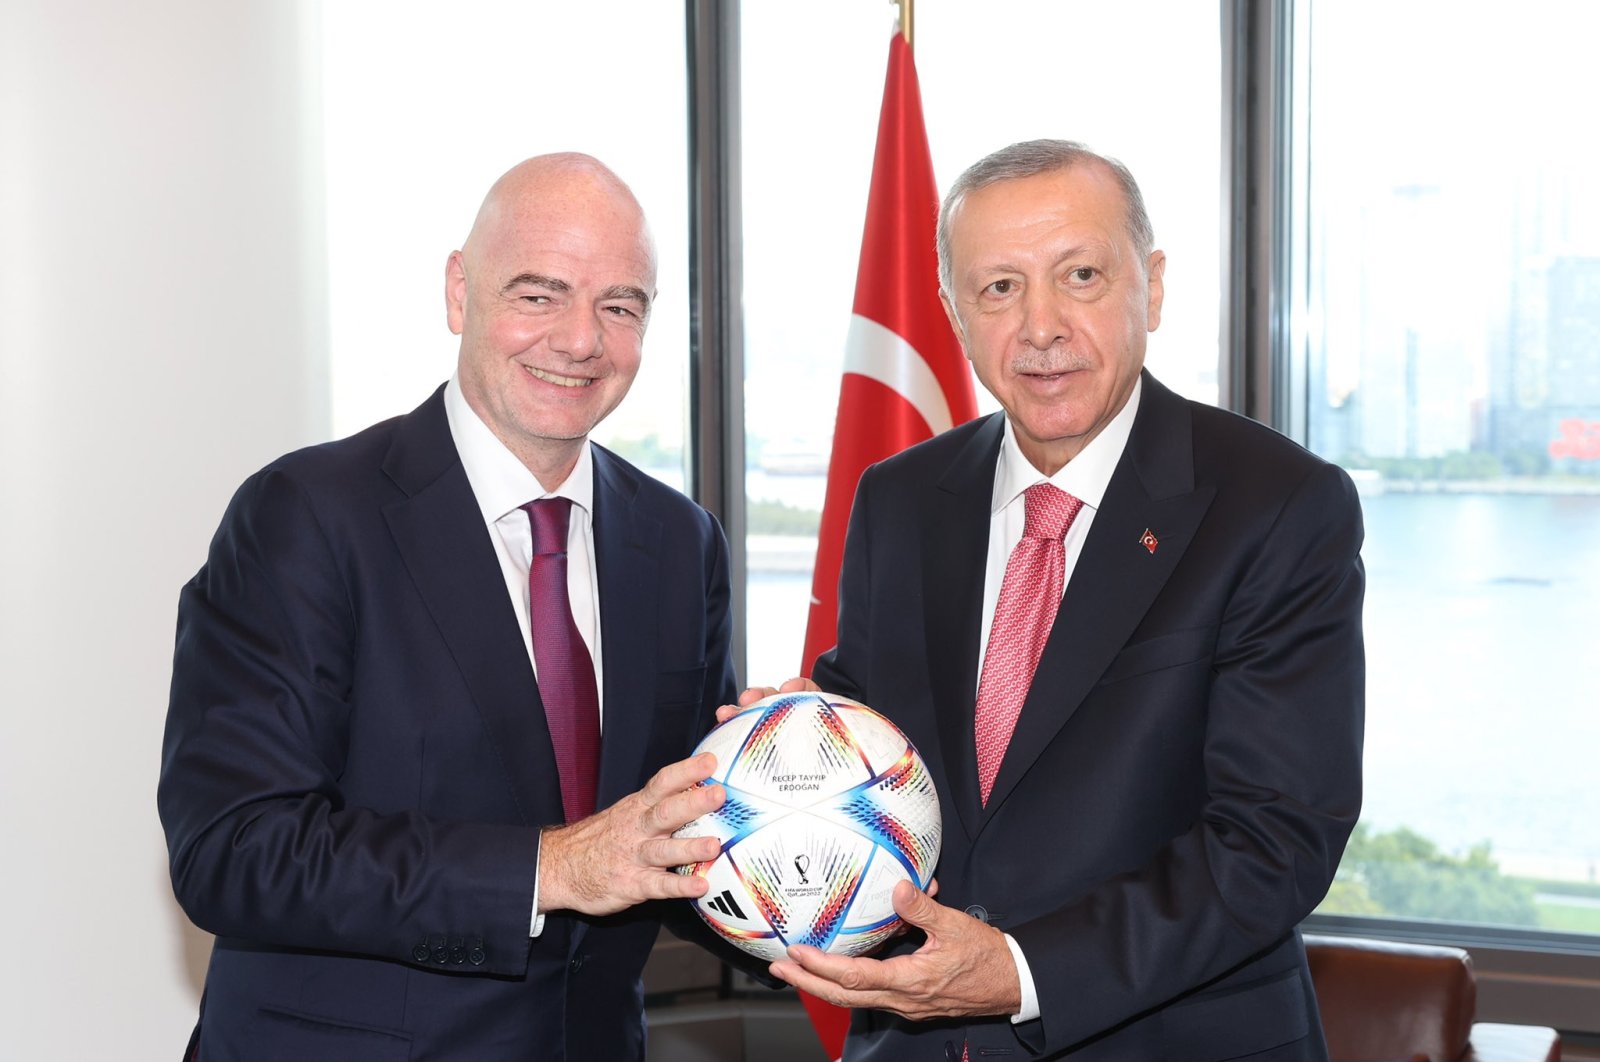 President Recep Tayyip Erdoğan (R) receives the Qatar 2022 World Cup official match ball from FIFA President Gianni Infantino, New York, U.S., Sept. 21, 2022. (DHA Photo)